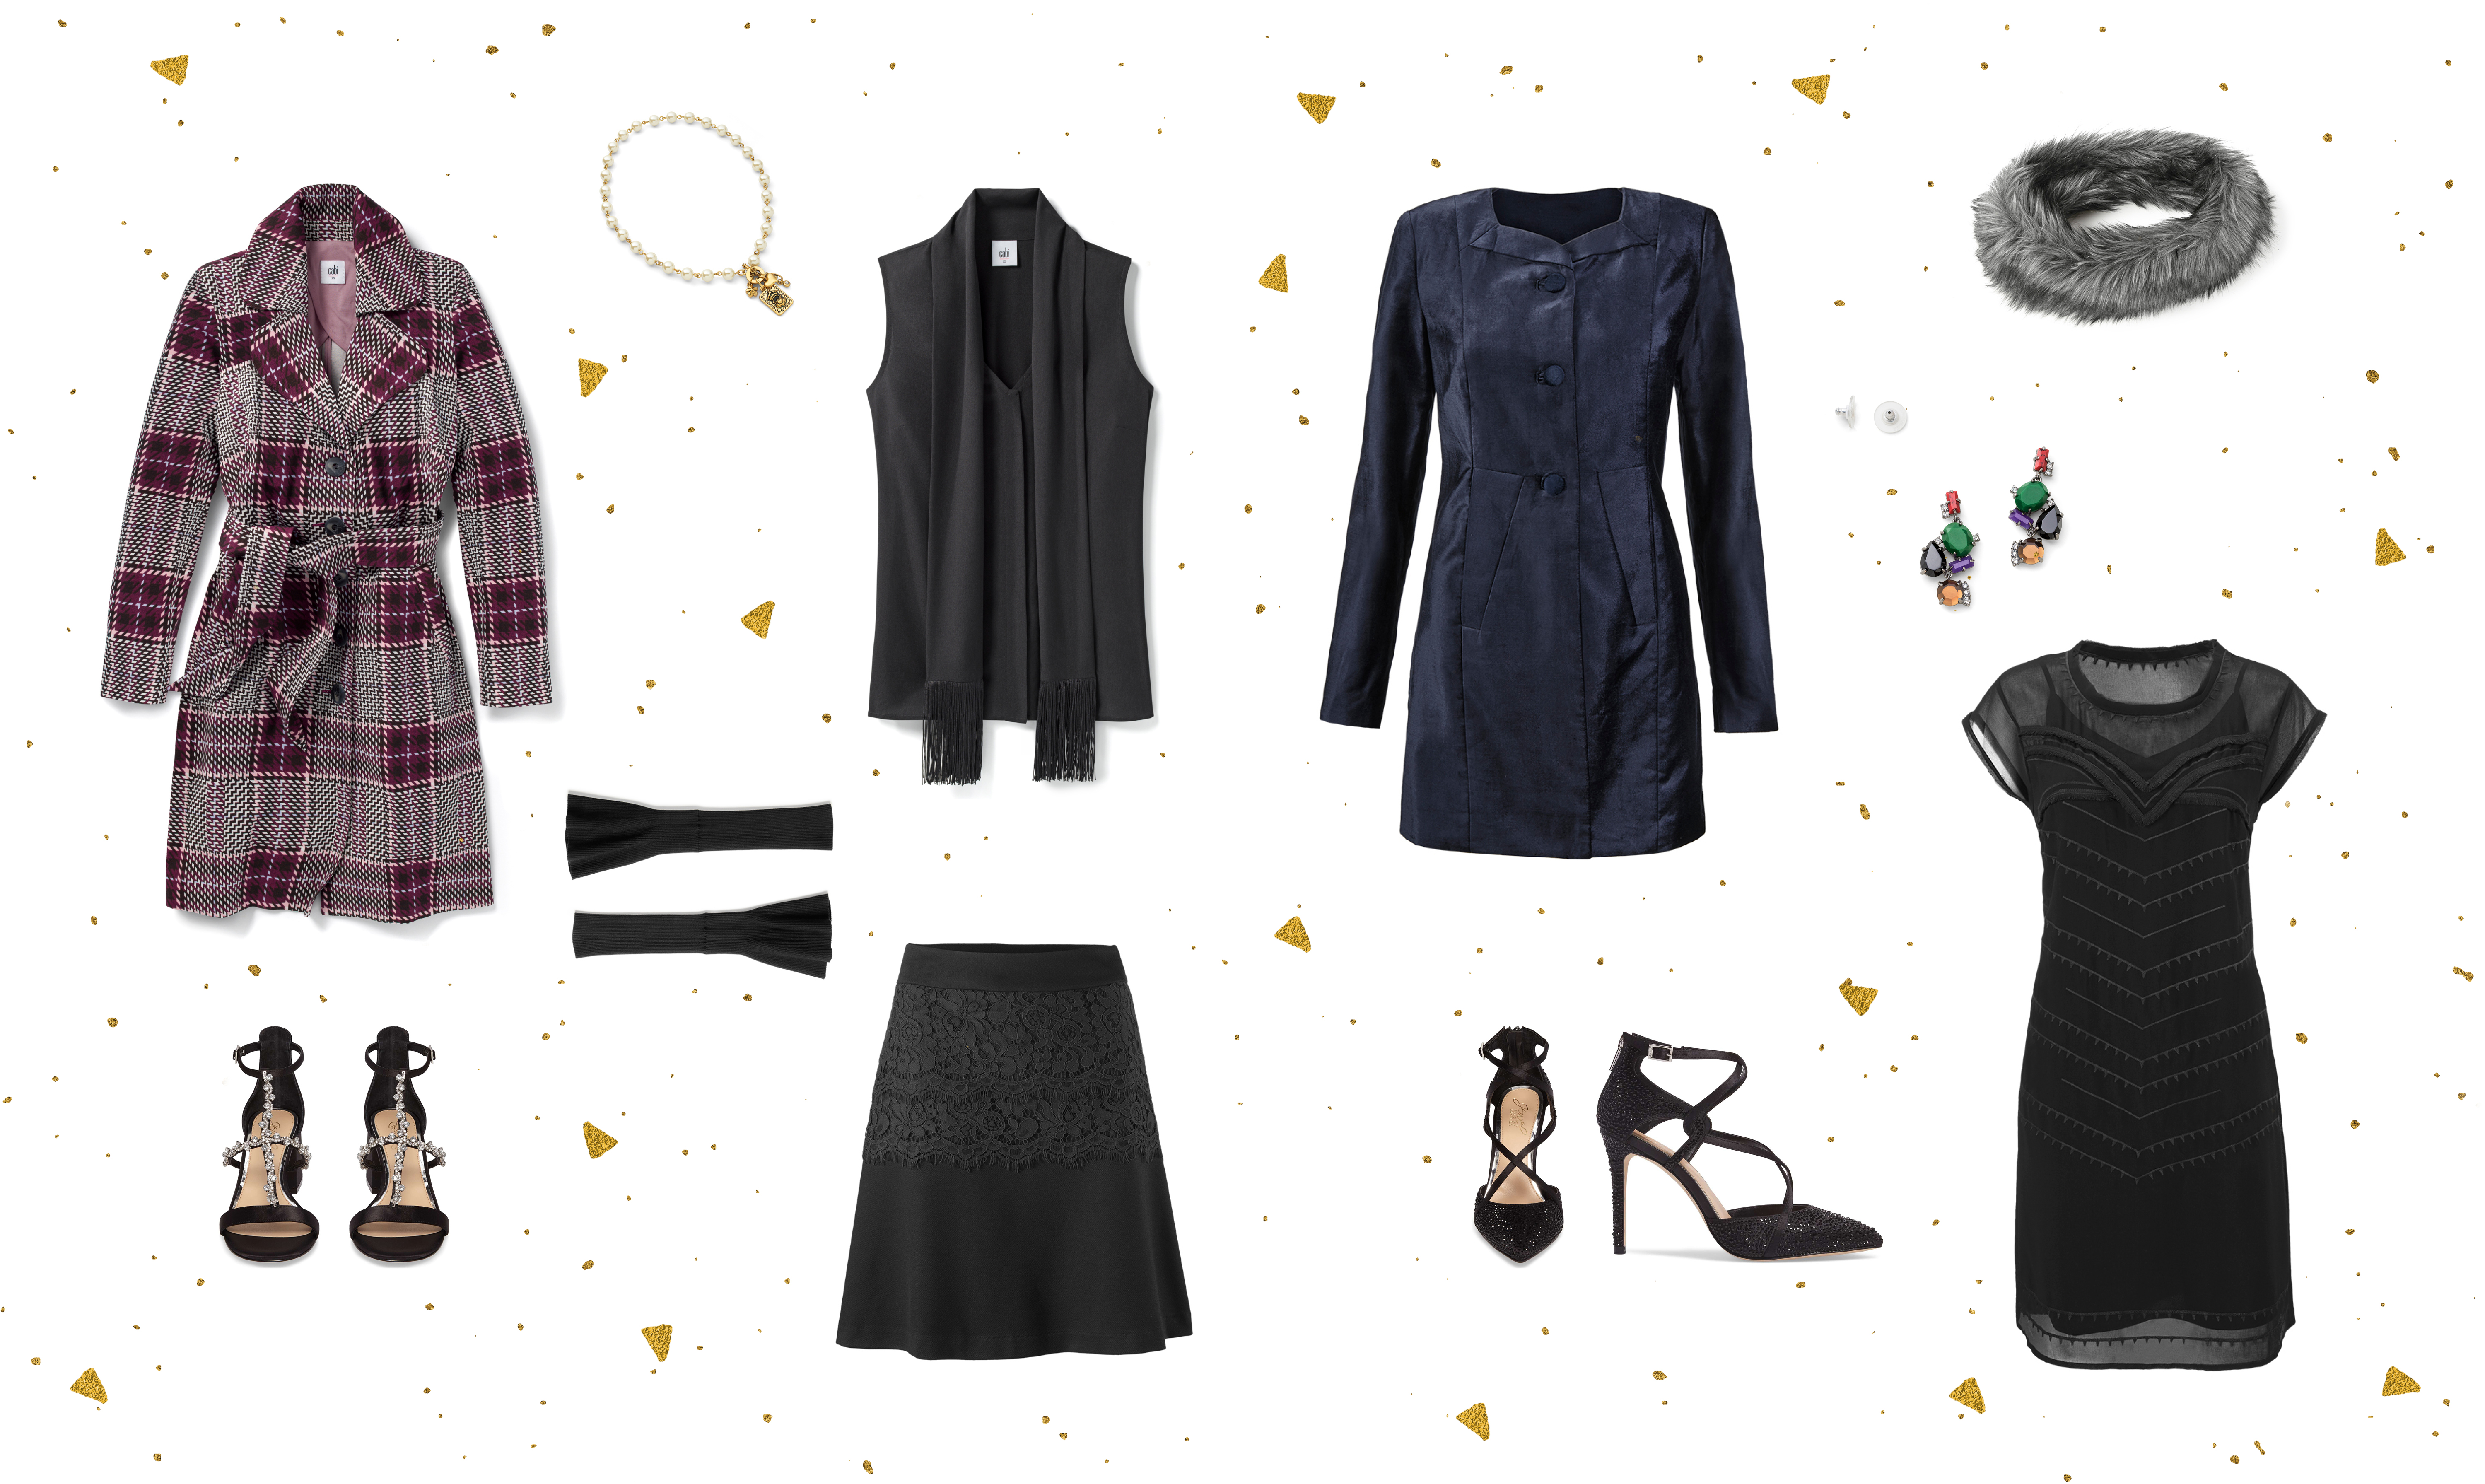 5 holiday party outfits to celebrate in style